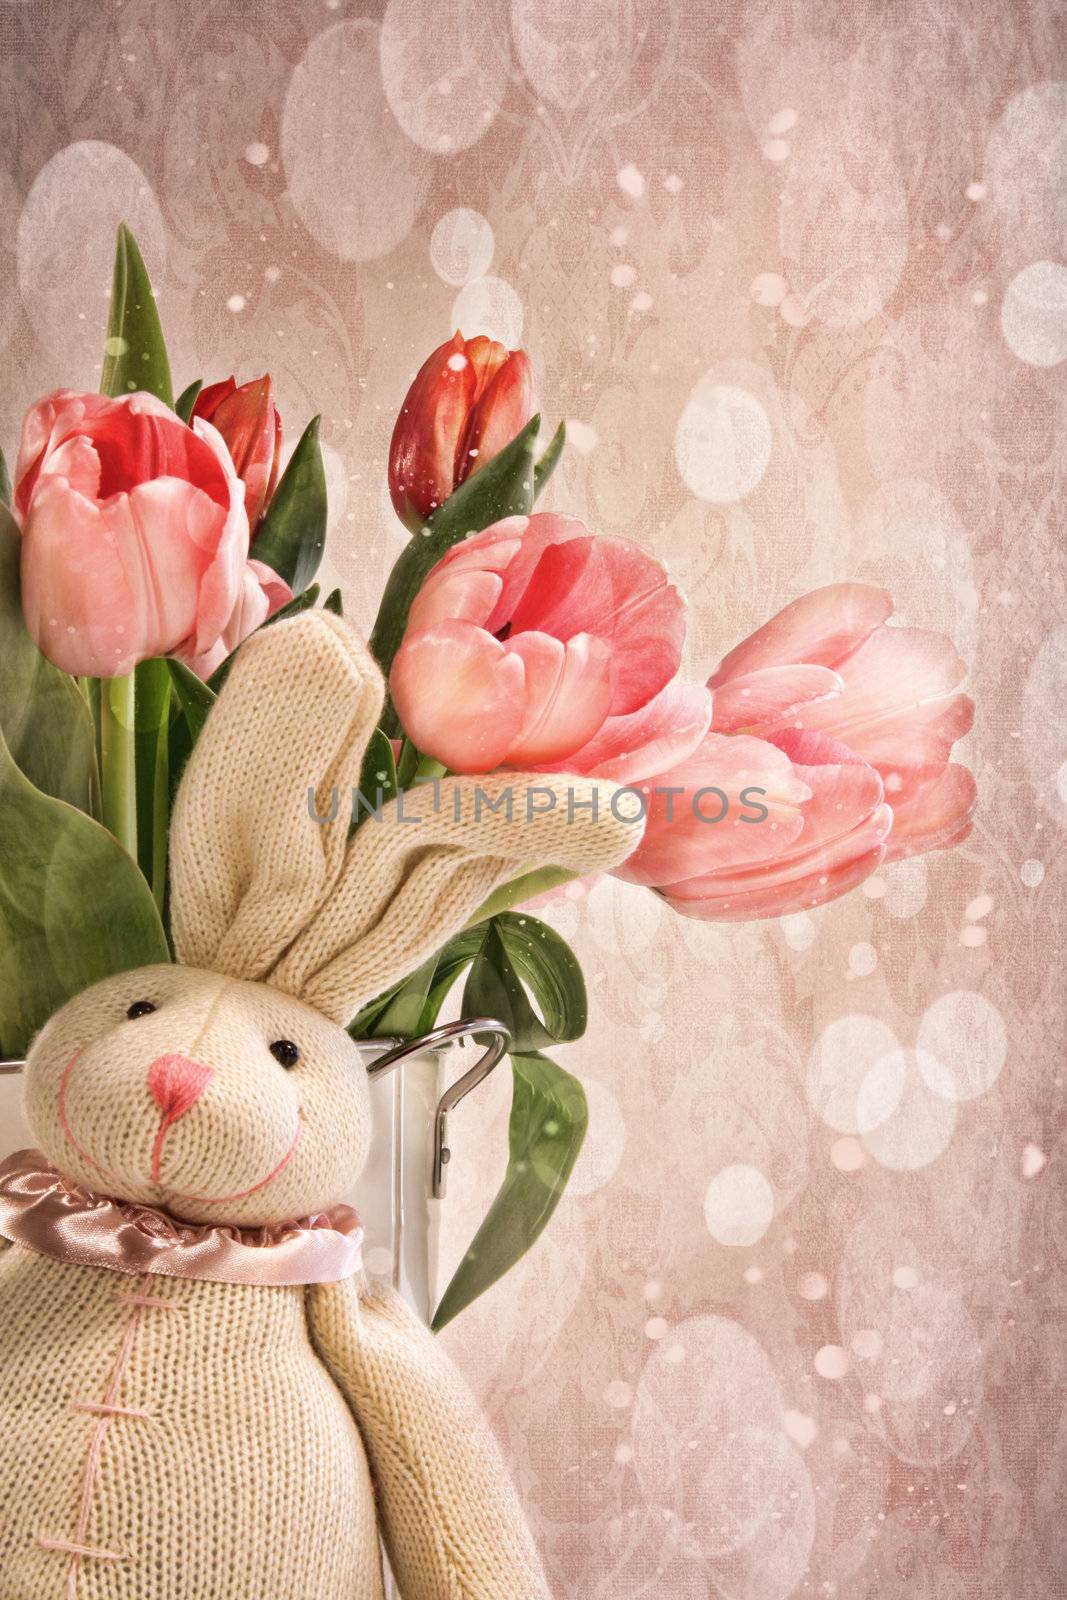 Toy rabbit with tulips for easter by Sandralise